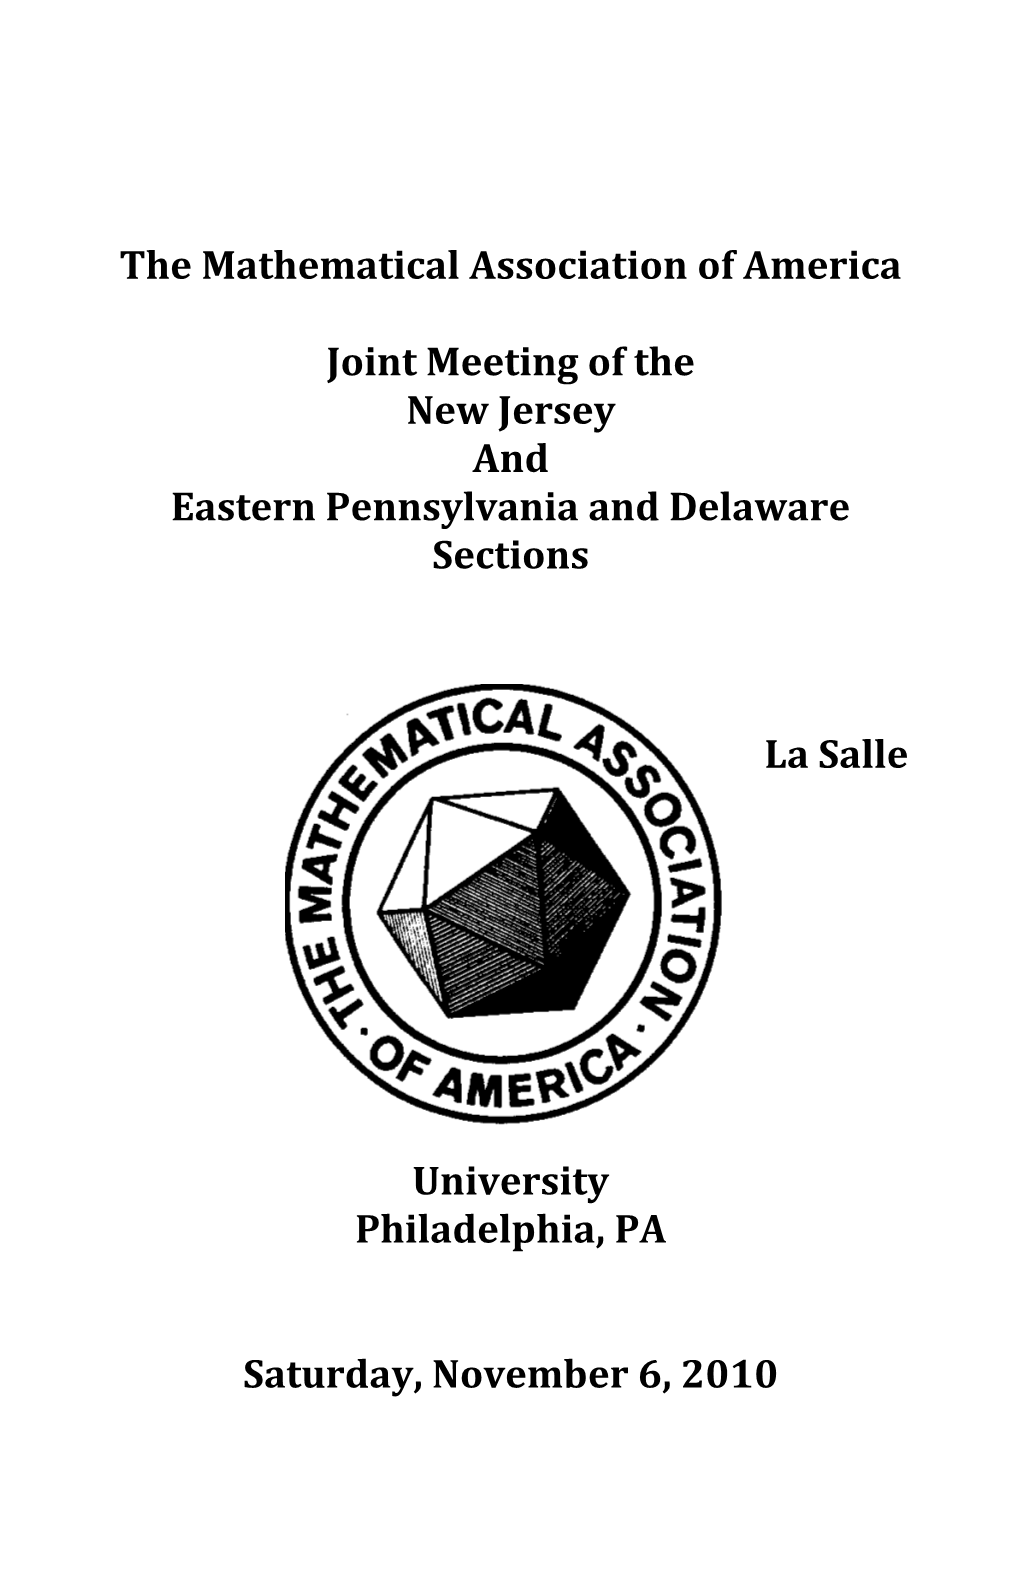 The Mathematical Association of America